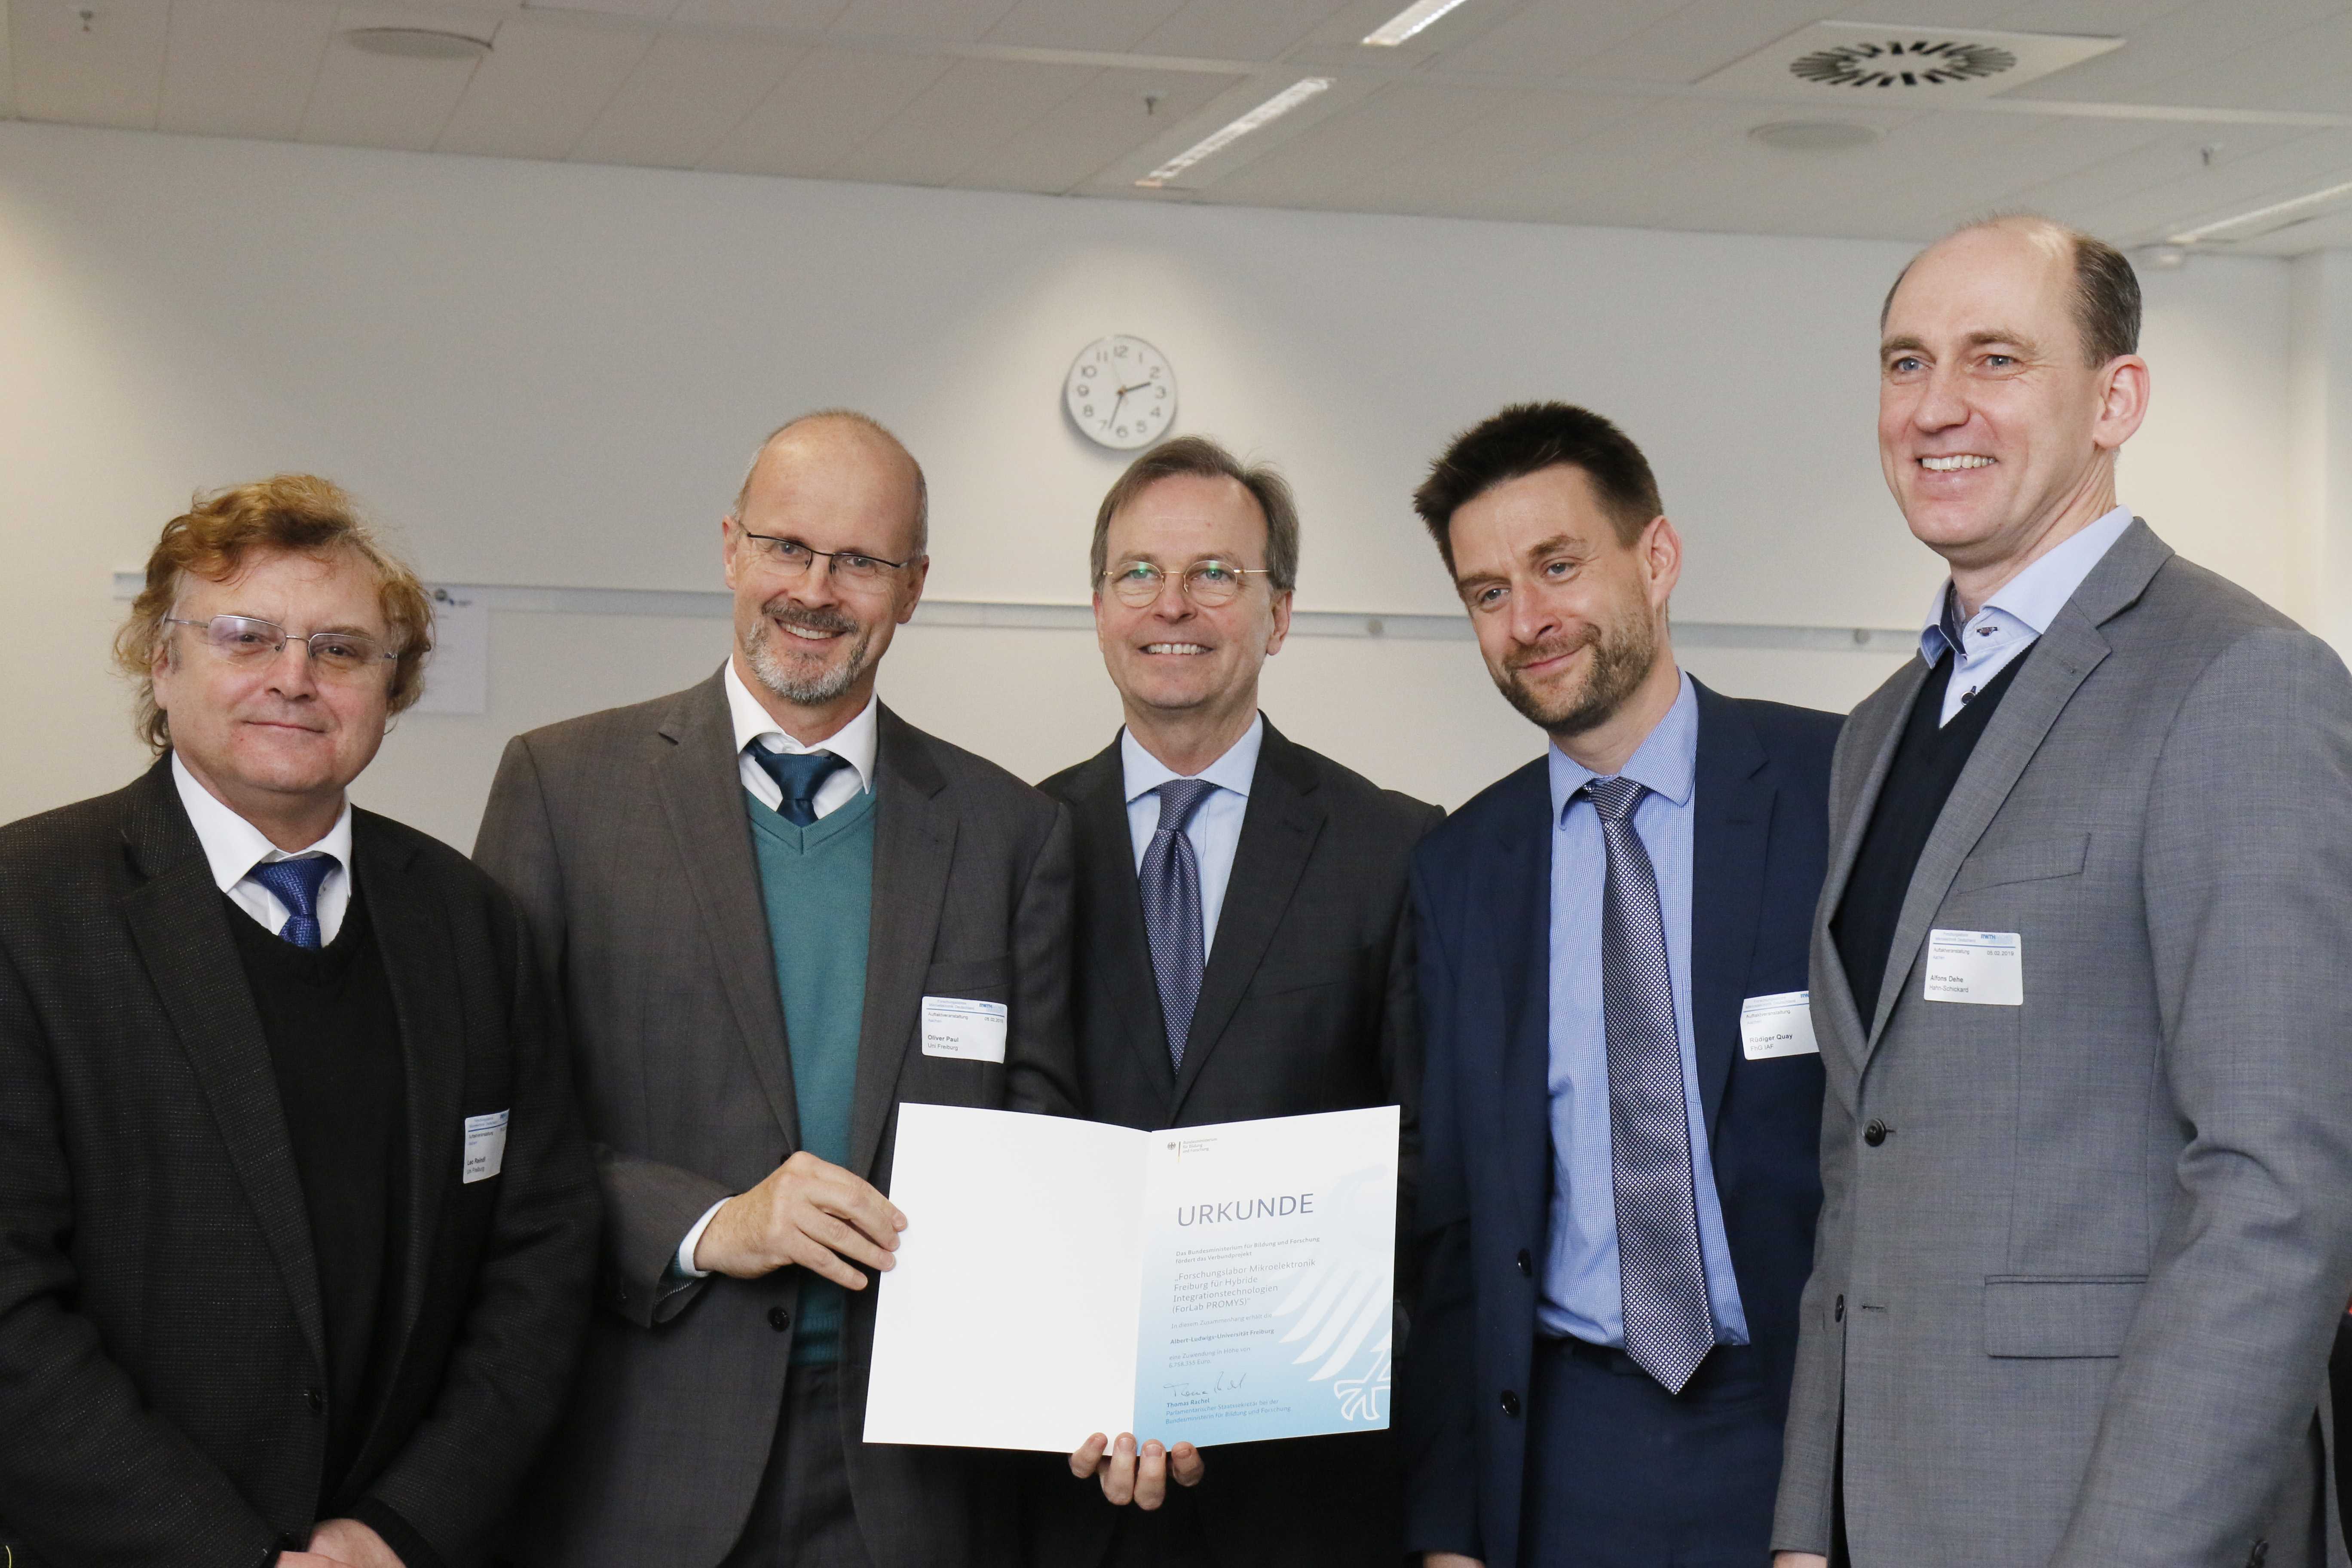 Parliamentary State Secretary Thomas Rachel (centre) hands over the funding certificate to the participants of the Freiburg PROMYS project. From left to right: Prof. Leo Reindl, Universität Freiburg, Prof. Oliver Paul, Universität Freiburg, Thomas Rachel, Staatssekretär, Dr. Rüdiger Quay, Fraunhofer IAF, Dr. Alfons Dehe, Hahn-Schickard